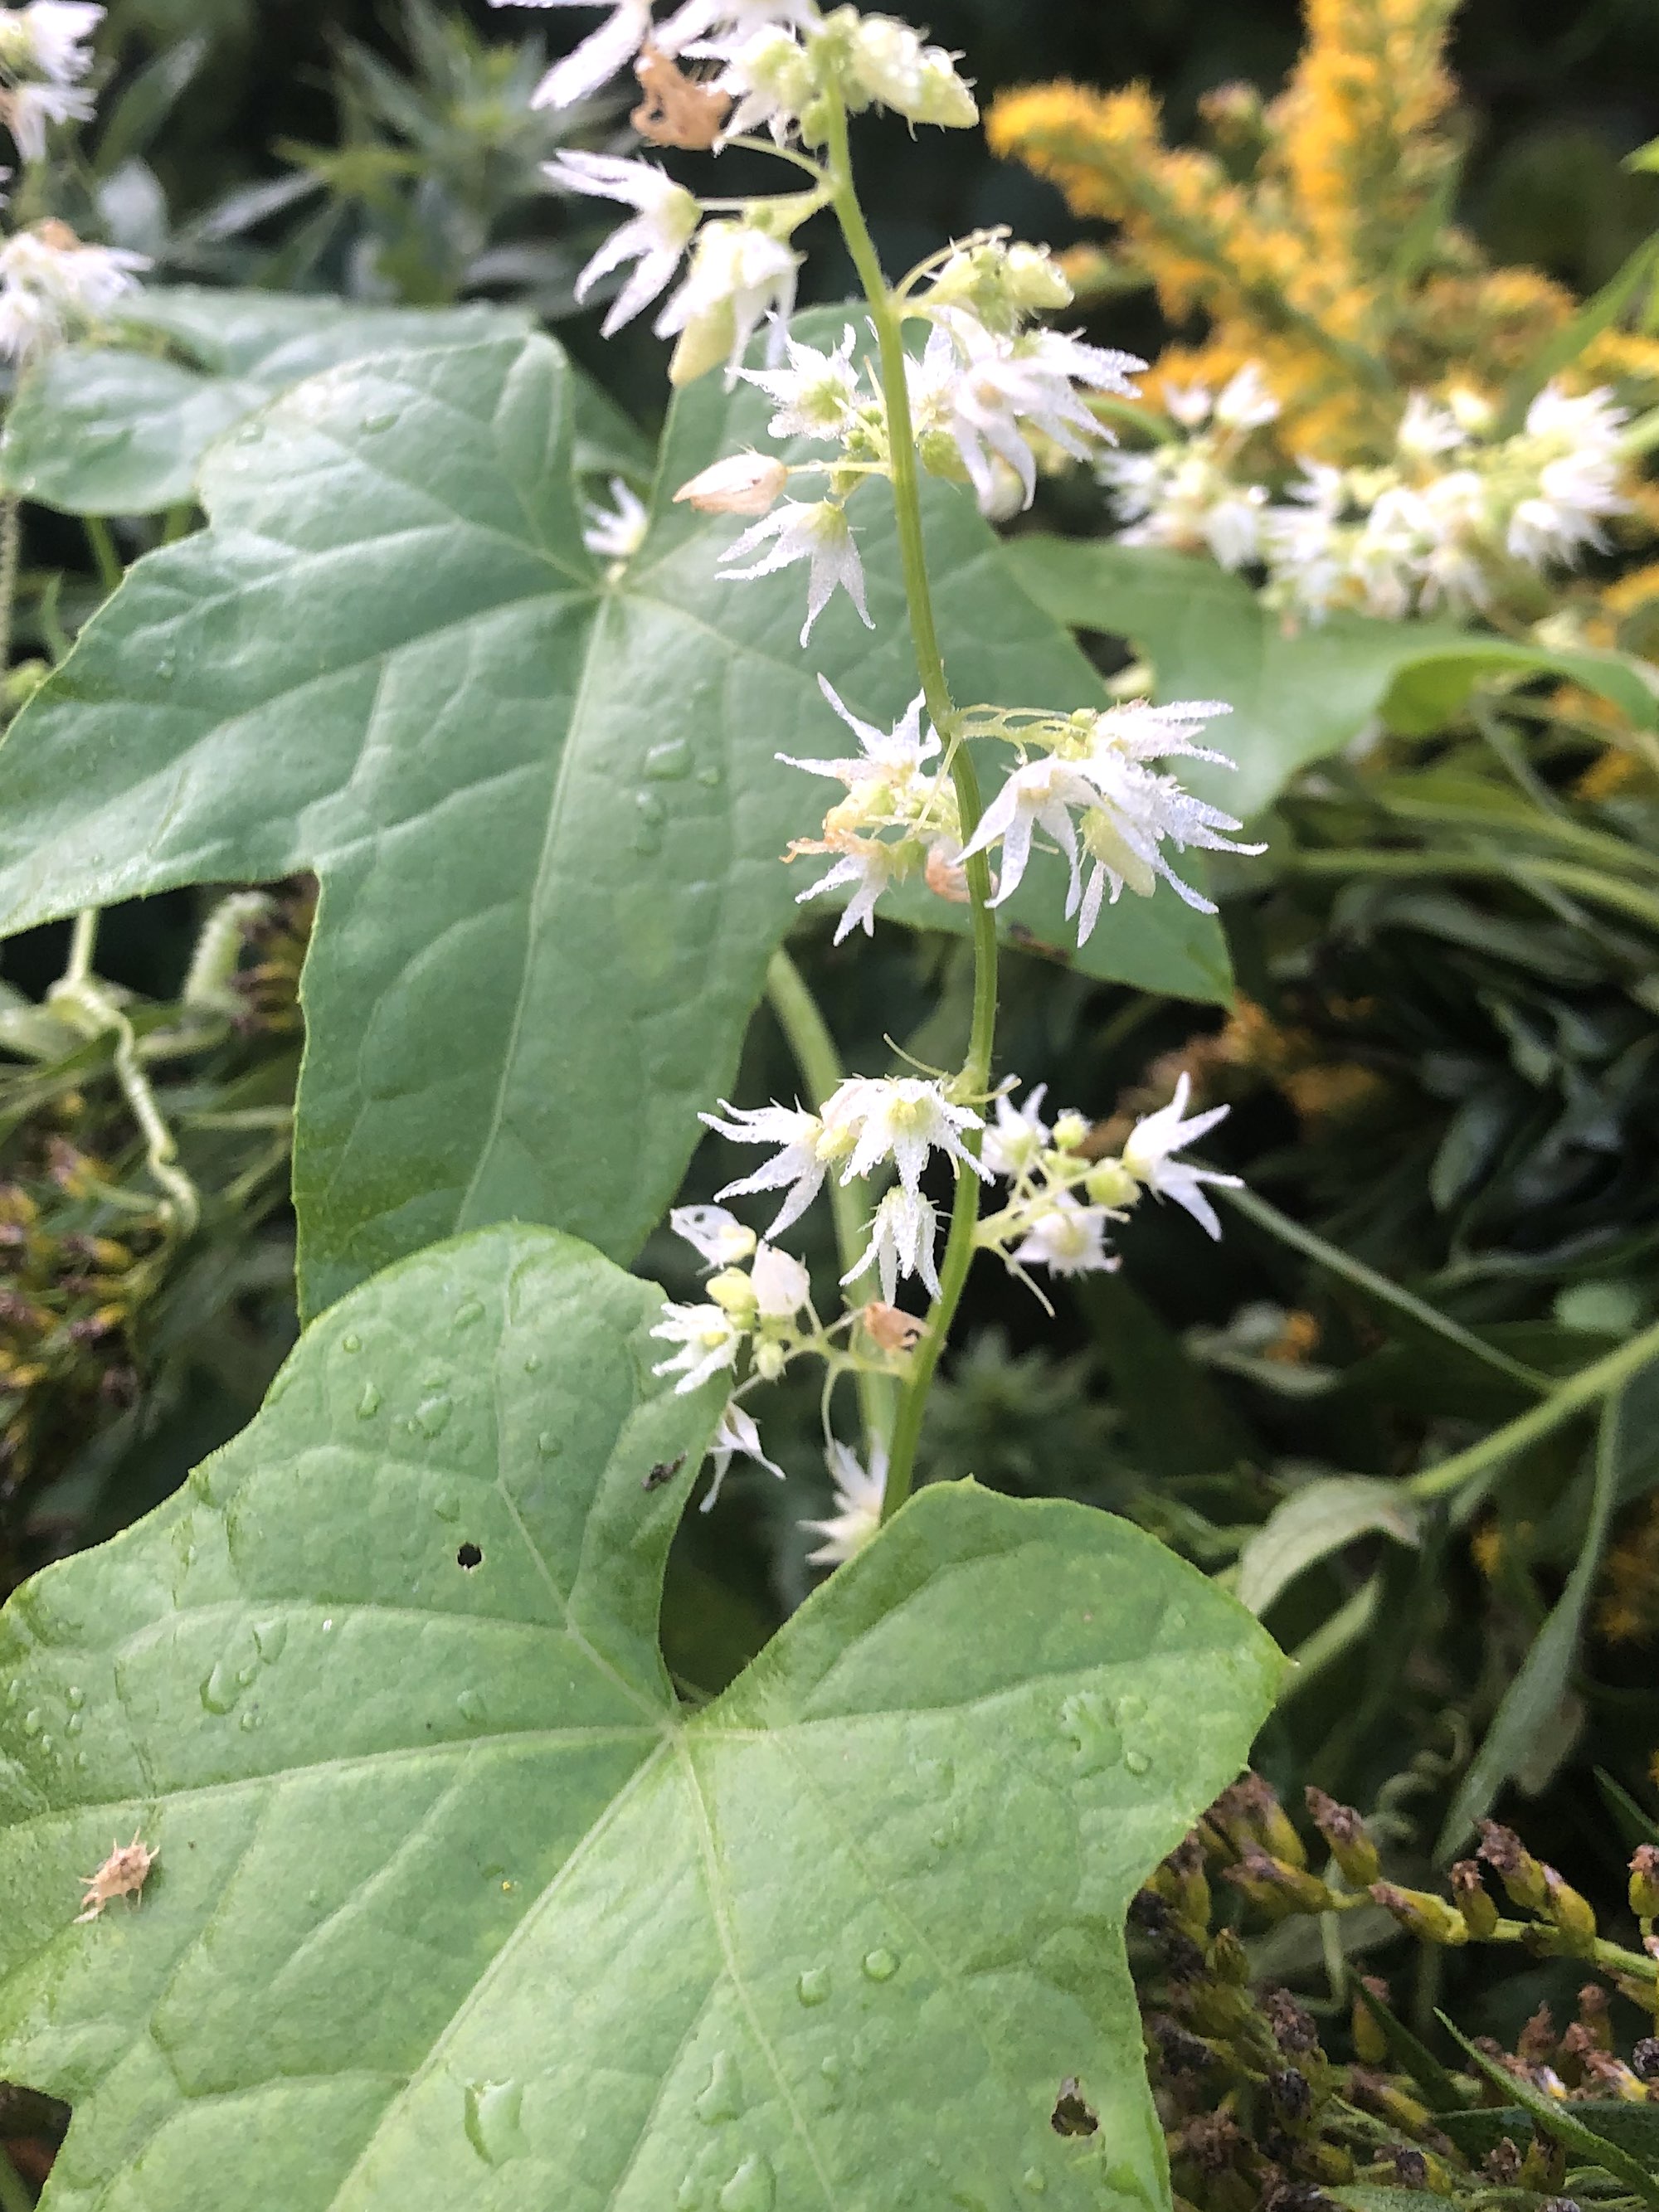 Wild Cucumber at edge of woods on Arbor Drive in Madison, Wisconsin on September 15, 2020.